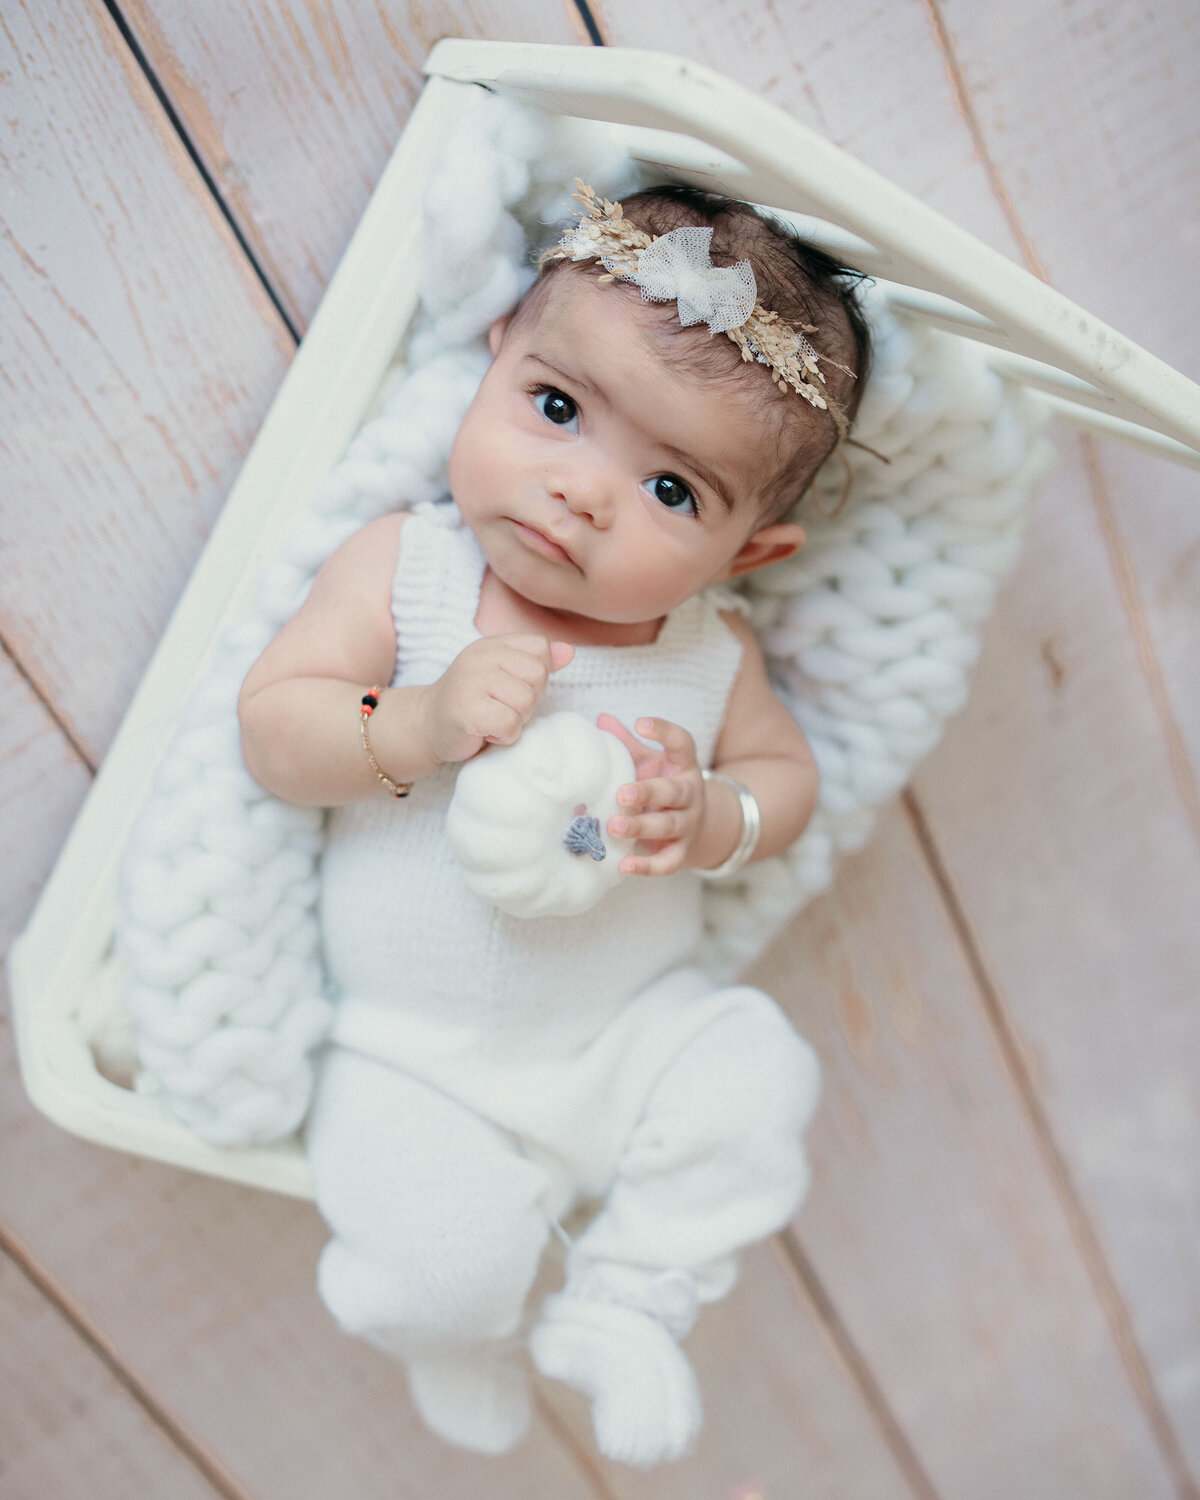 Newborn girl awake and looking right at camera dressed in white long pants romper holding white mini pumpkin and laying in white baby bed